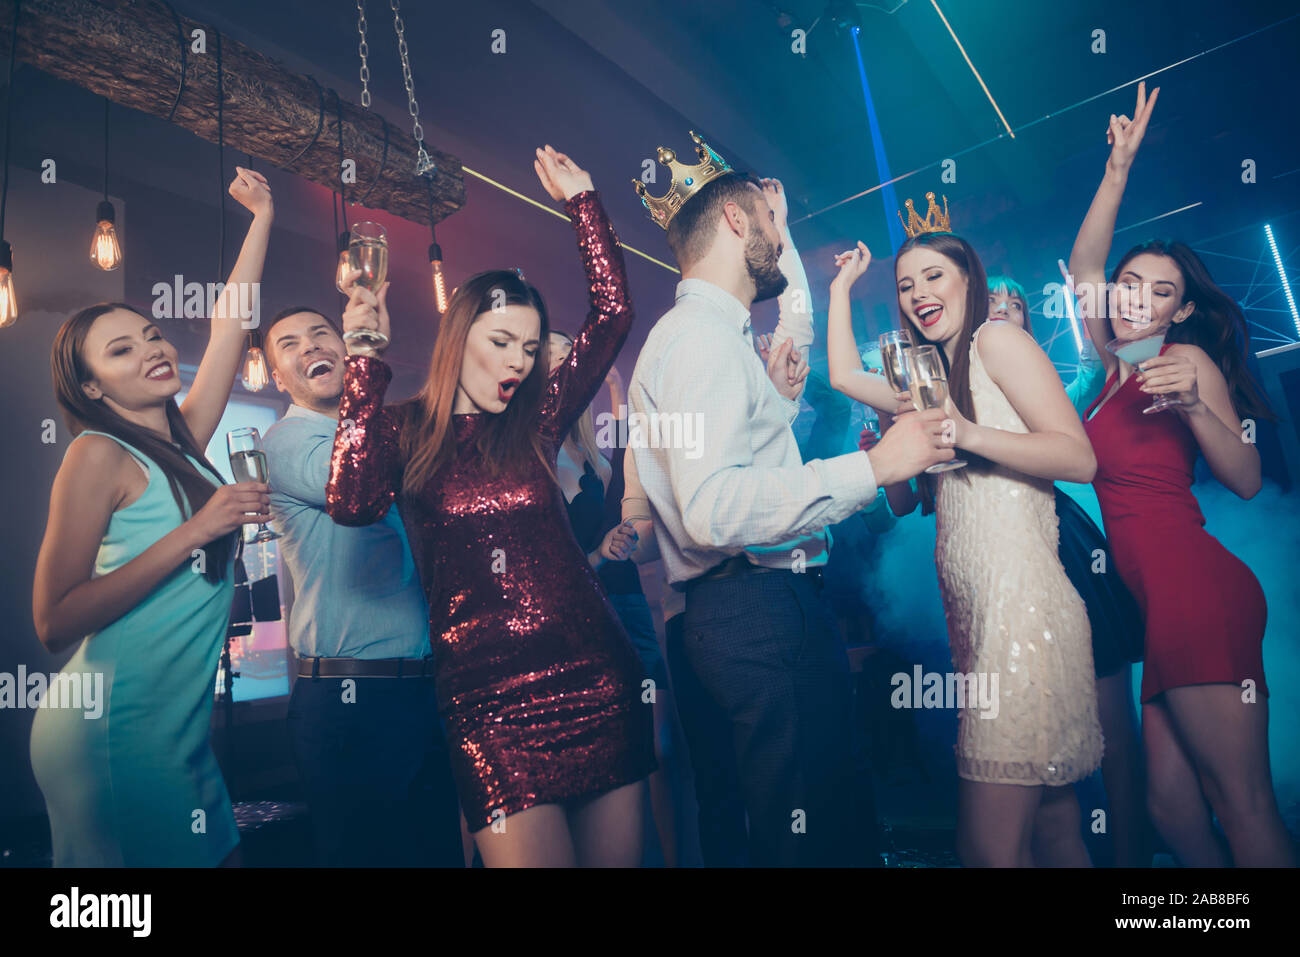 Clink cheers toast for excited prince and princess. Photo of excited cheerful glad carefree buddies celebrating prom with winners drinking alcohol Stock Photo